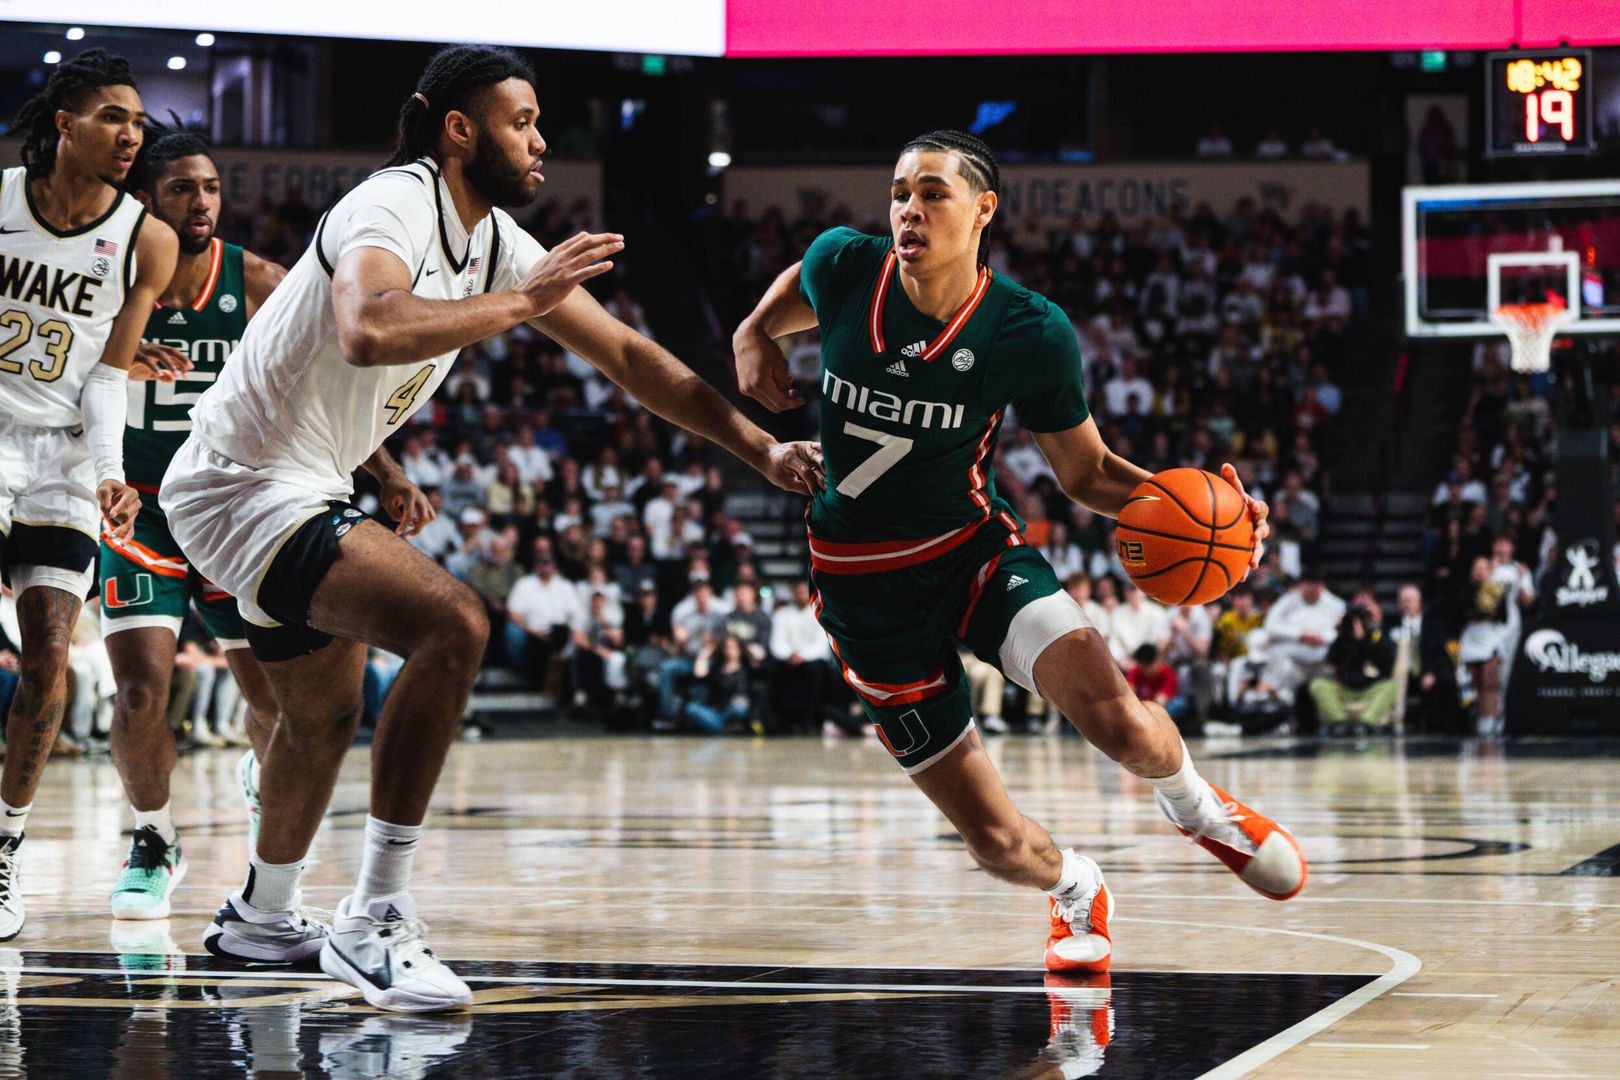 Miami Falls in Overtime at Wake Forest